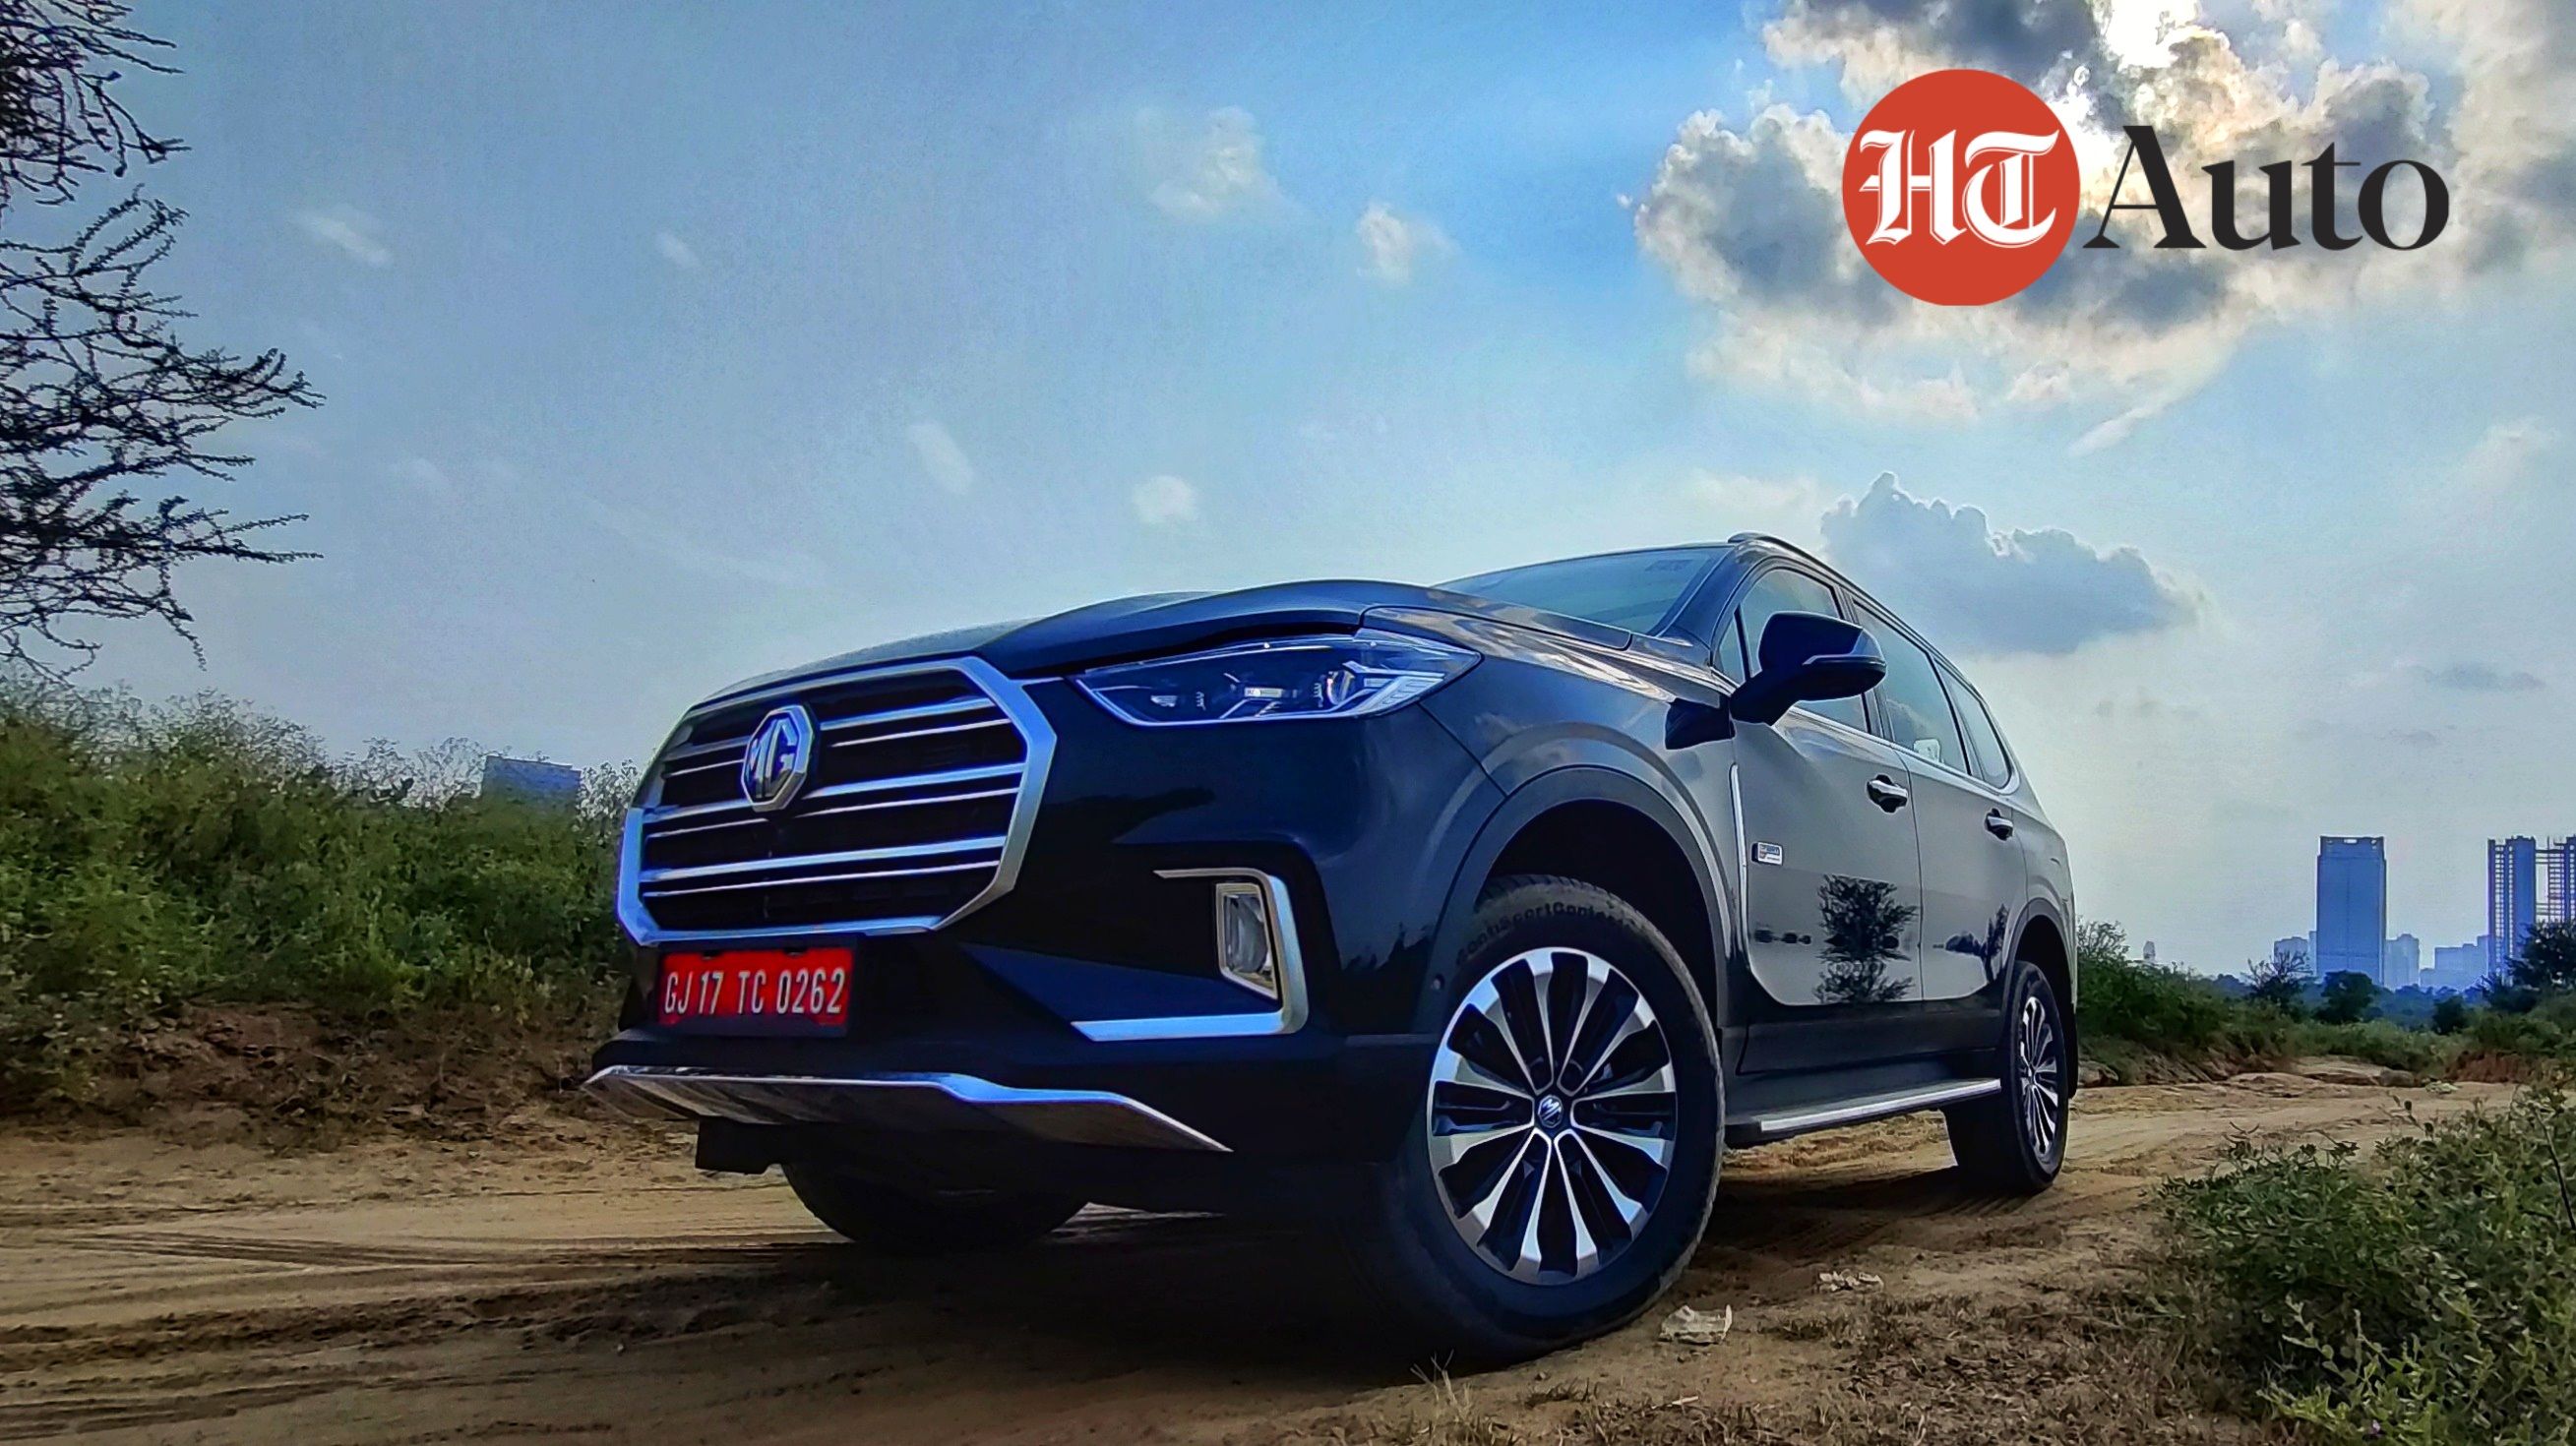 Gloster has a confidently muted visual profile and barring a large chrome grille, nothing seems to have been done in the extremes as far as styling is concerned. (Photo - Sabyasachi Dasgupta)